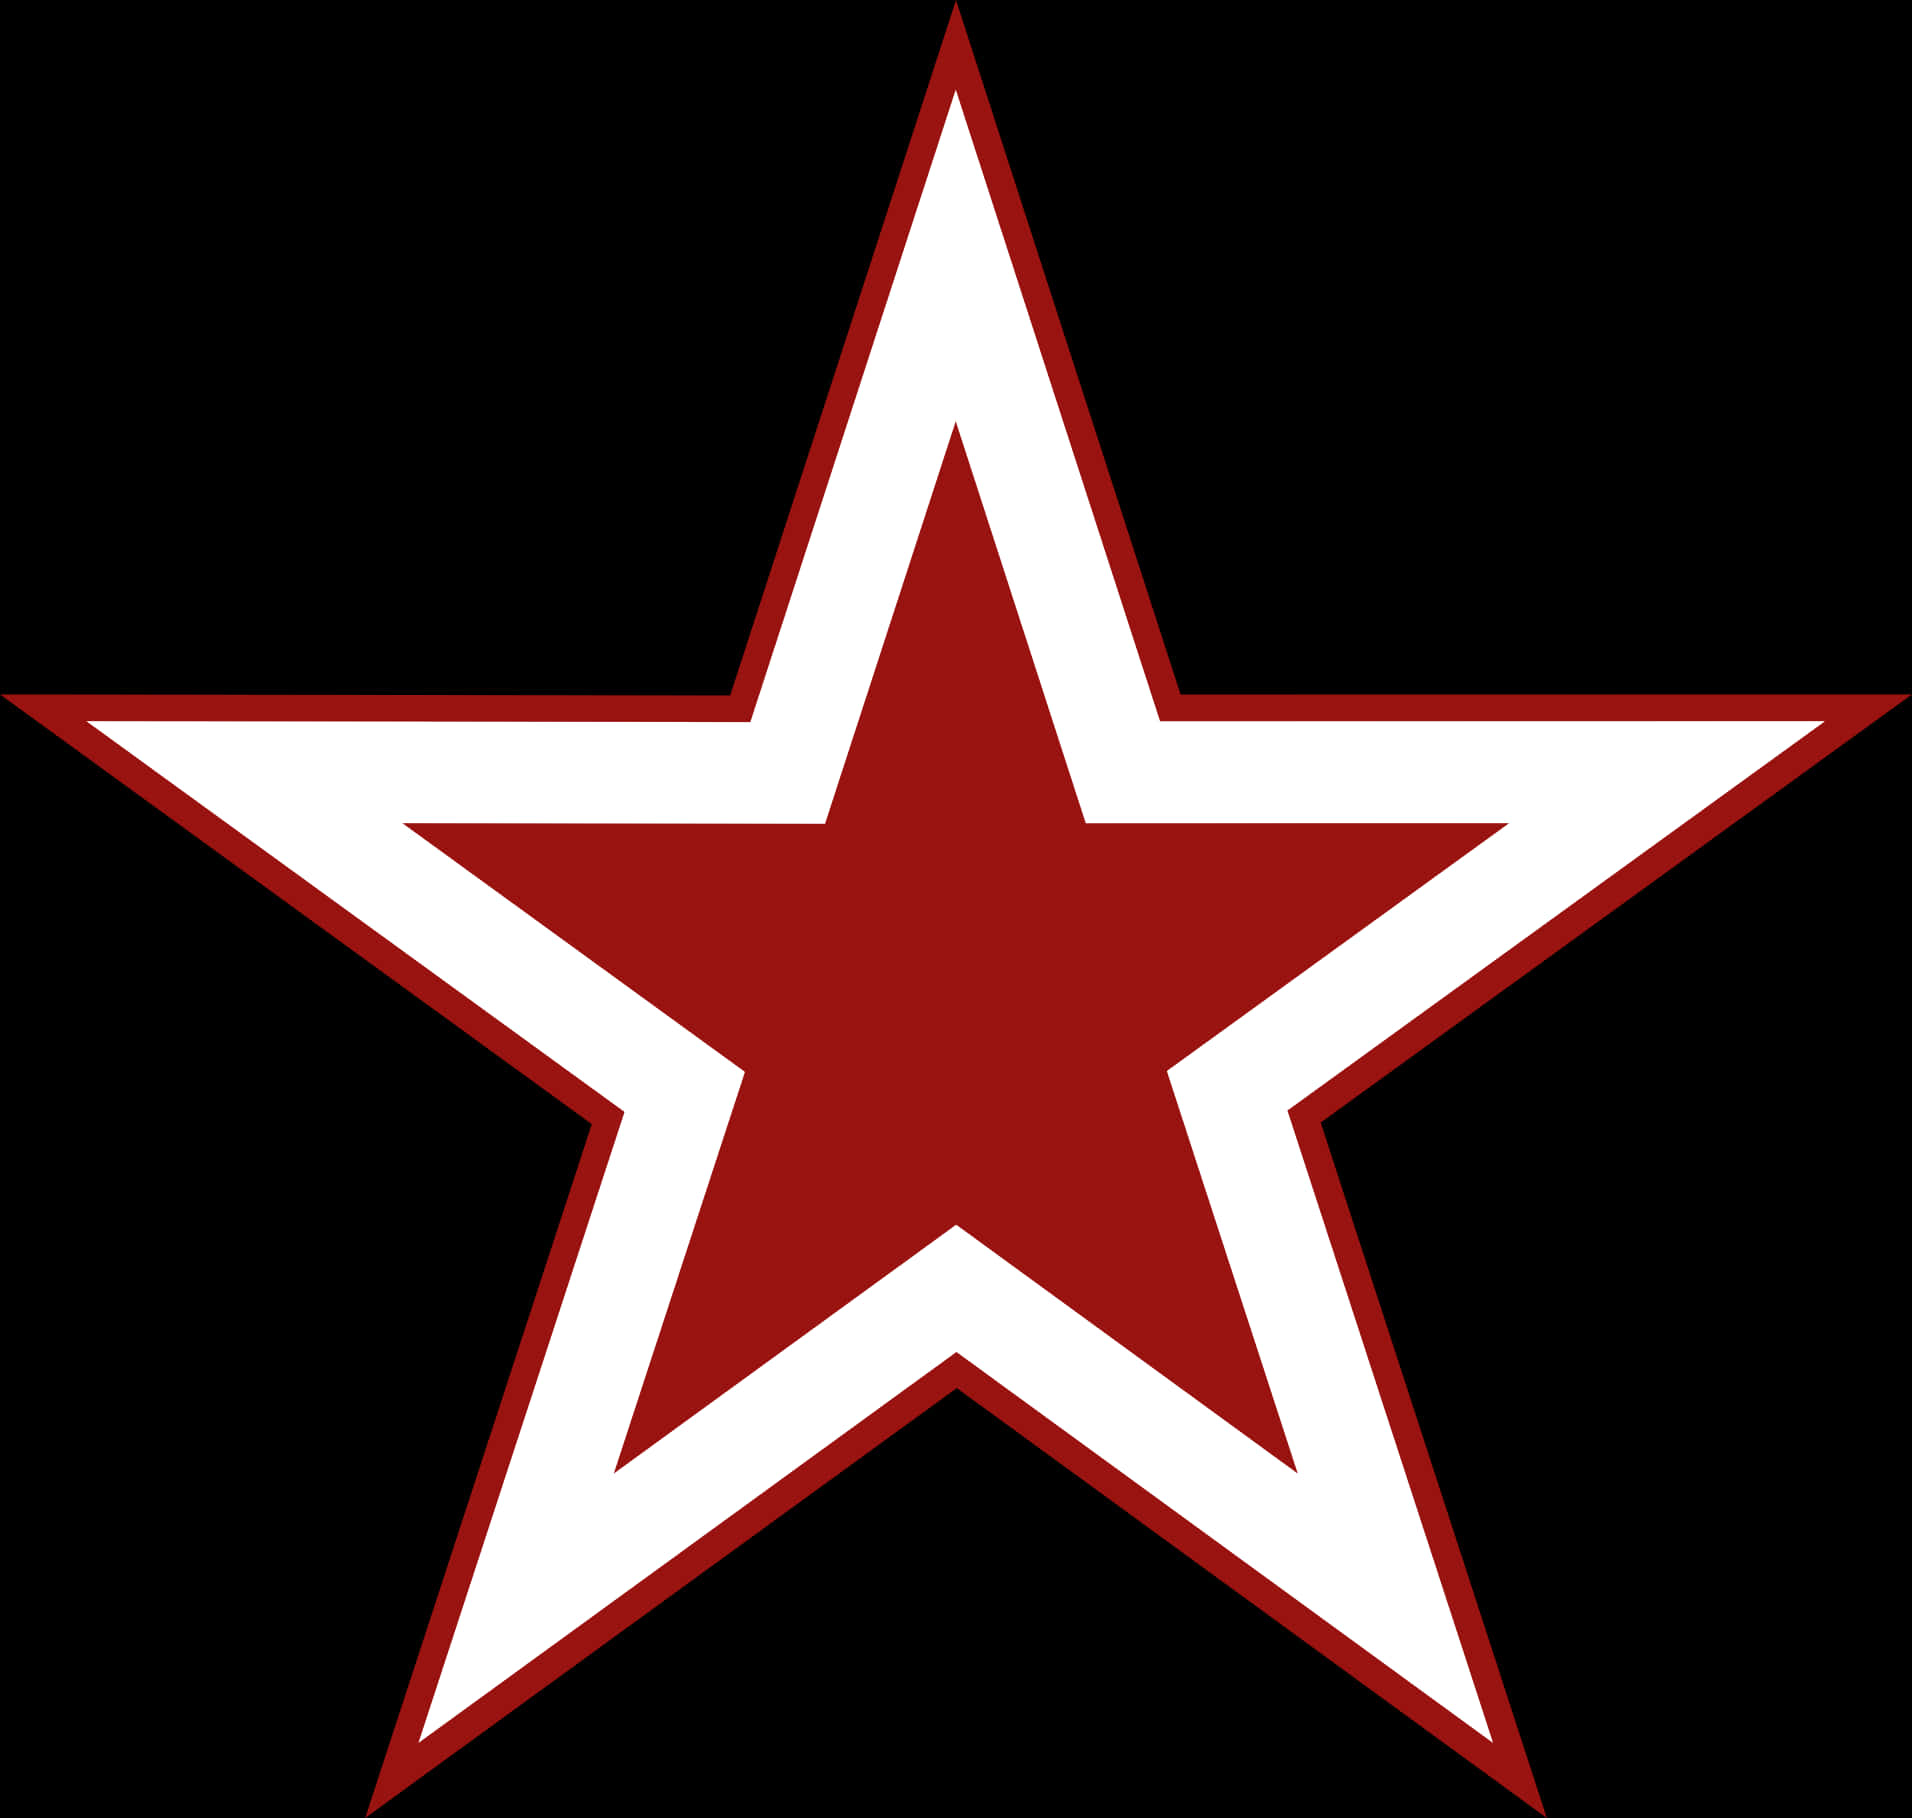 Redand White Star Graphic PNG